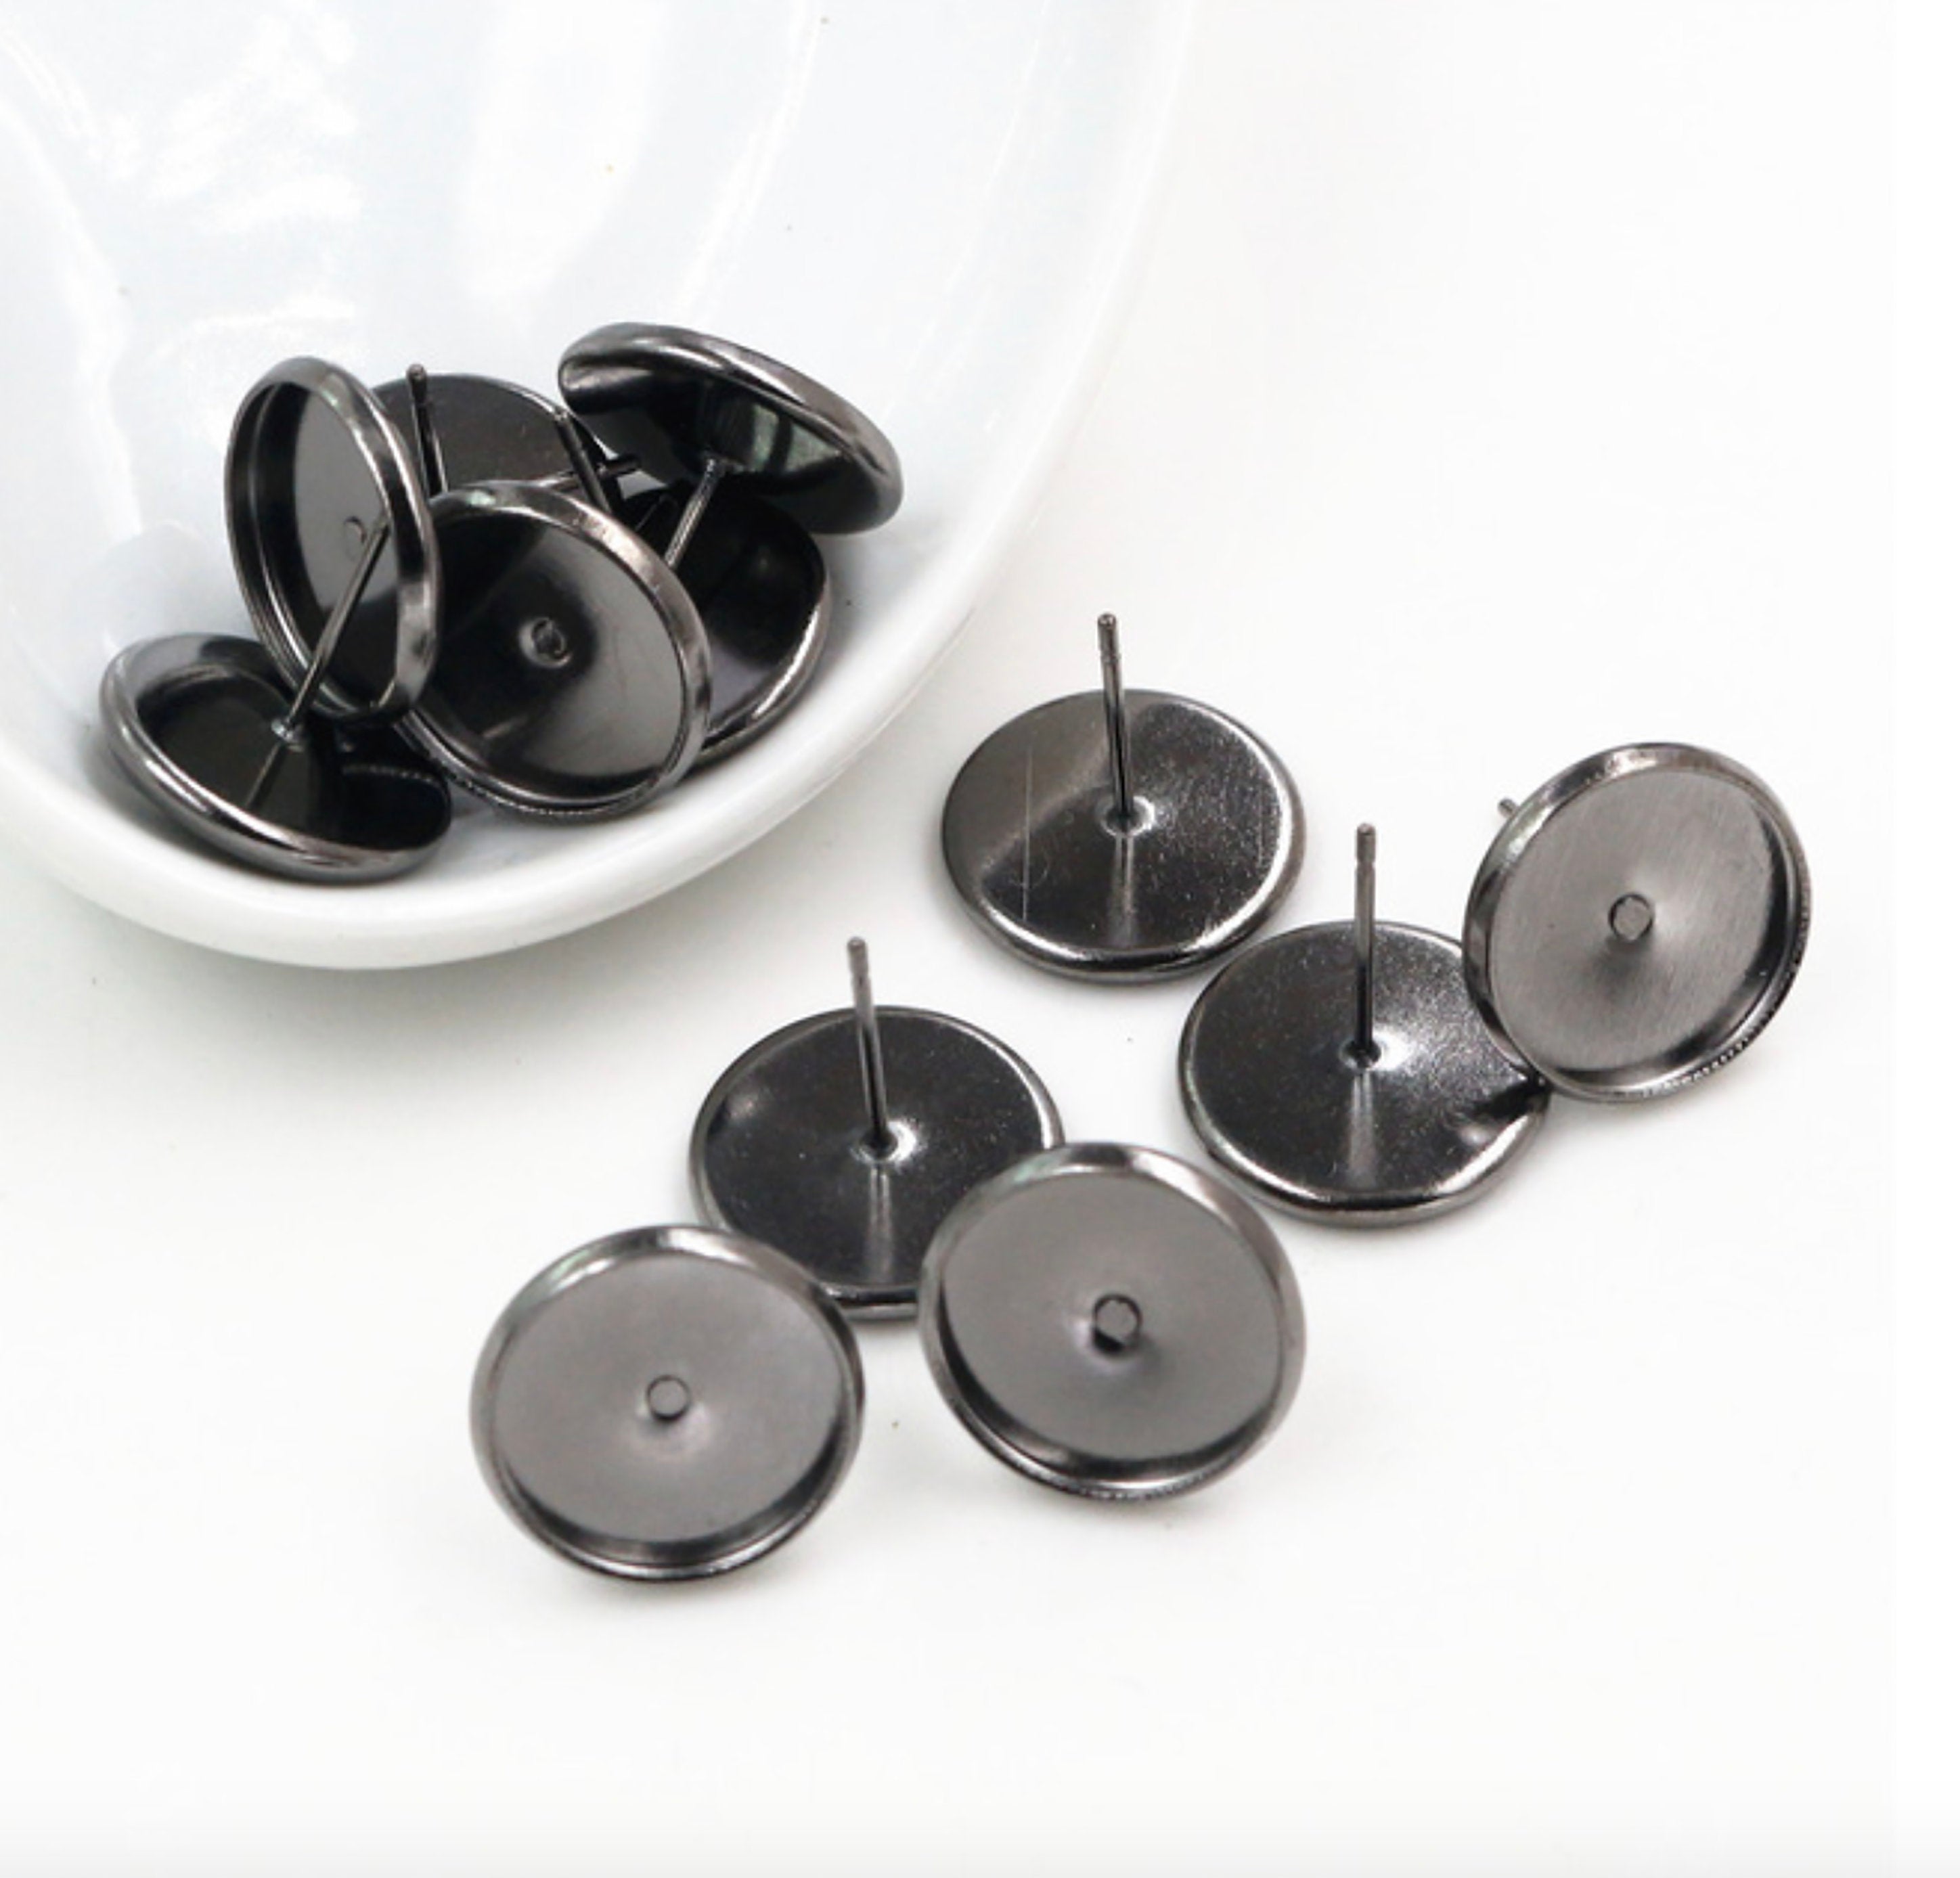 10pcs, 12mm Tray, High Quality Stainless Iron Earring Studs Base Settings with Ear plug, Lead free and nickel free in Gunmetal